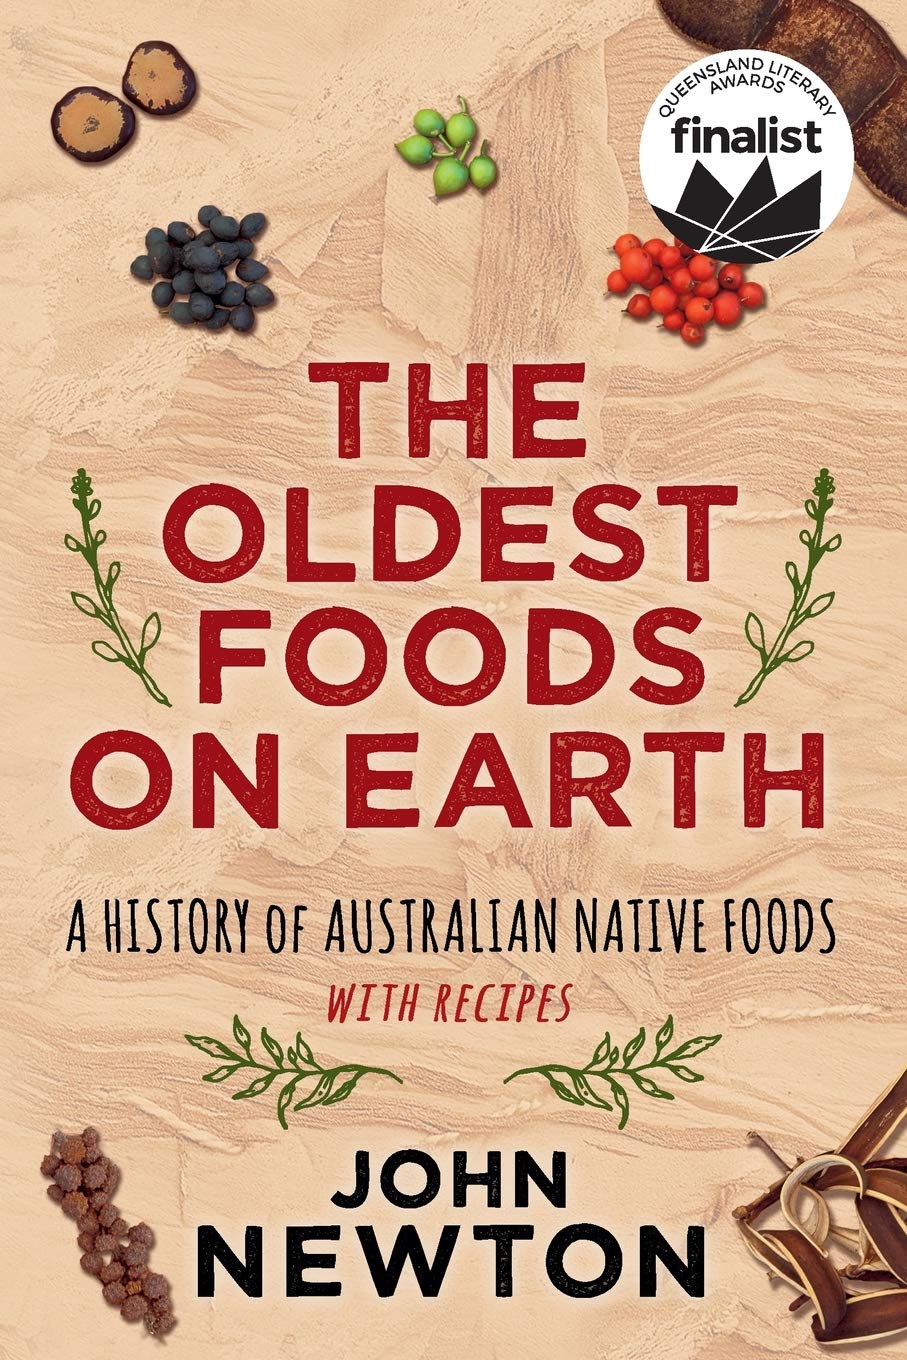 The Oldest Foods on Earth: A History of Australian Native Foods with Recipes (John Newton)